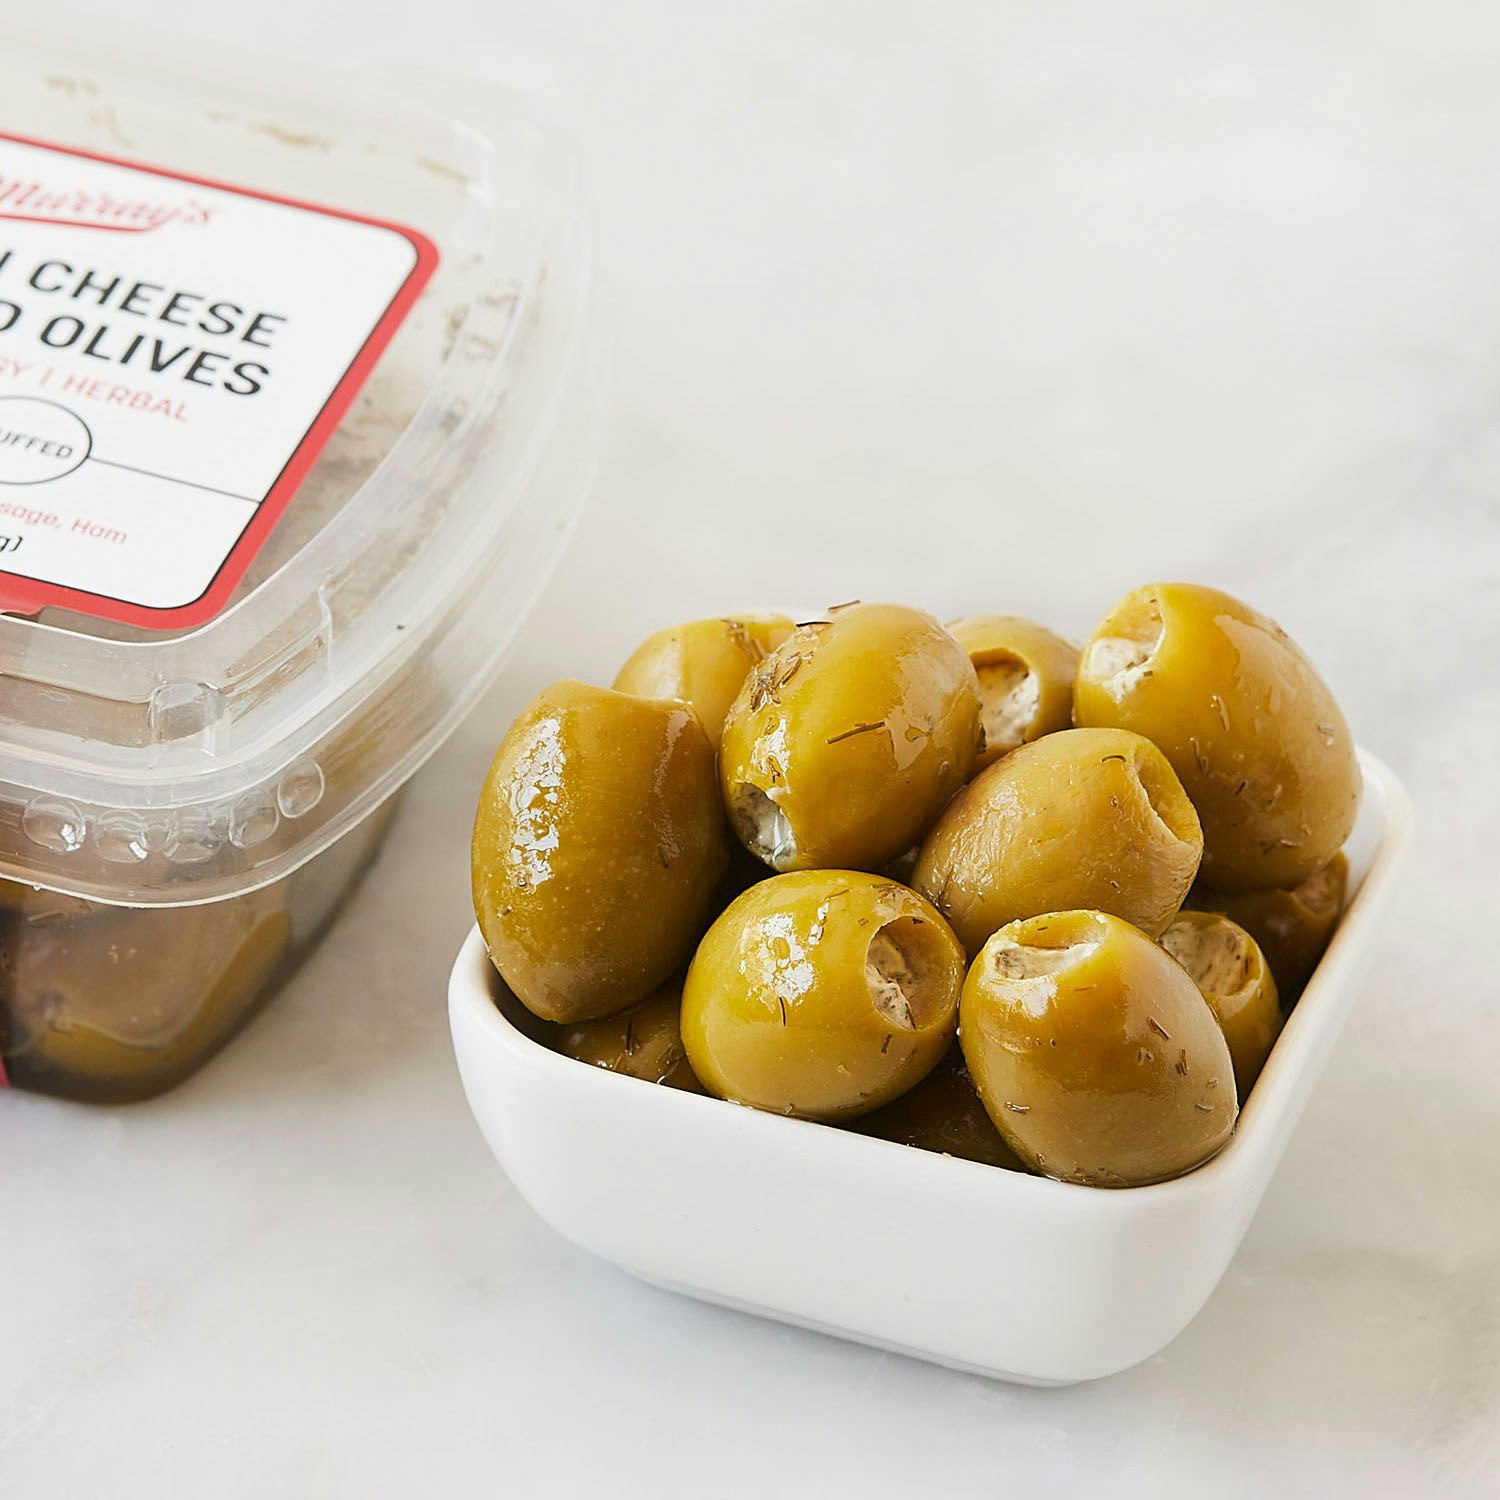 Murrays-Ranch-Cheese-Stuffed-Olives-specialty-foods-127345-01